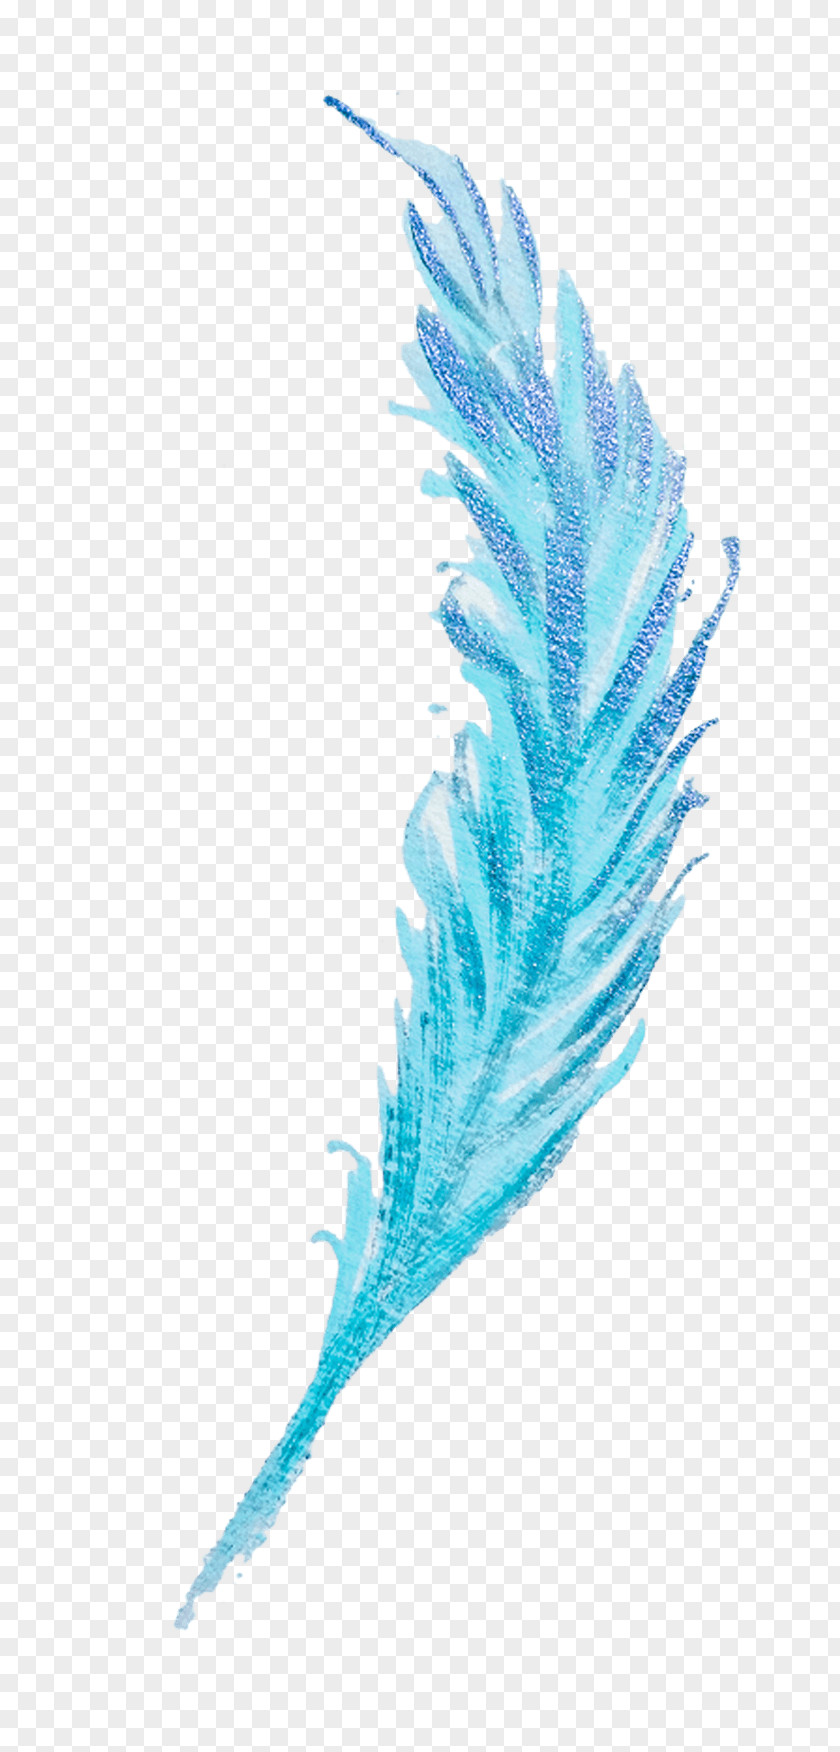 Falling Feathers Feather Image Watercolor Painting Design PNG